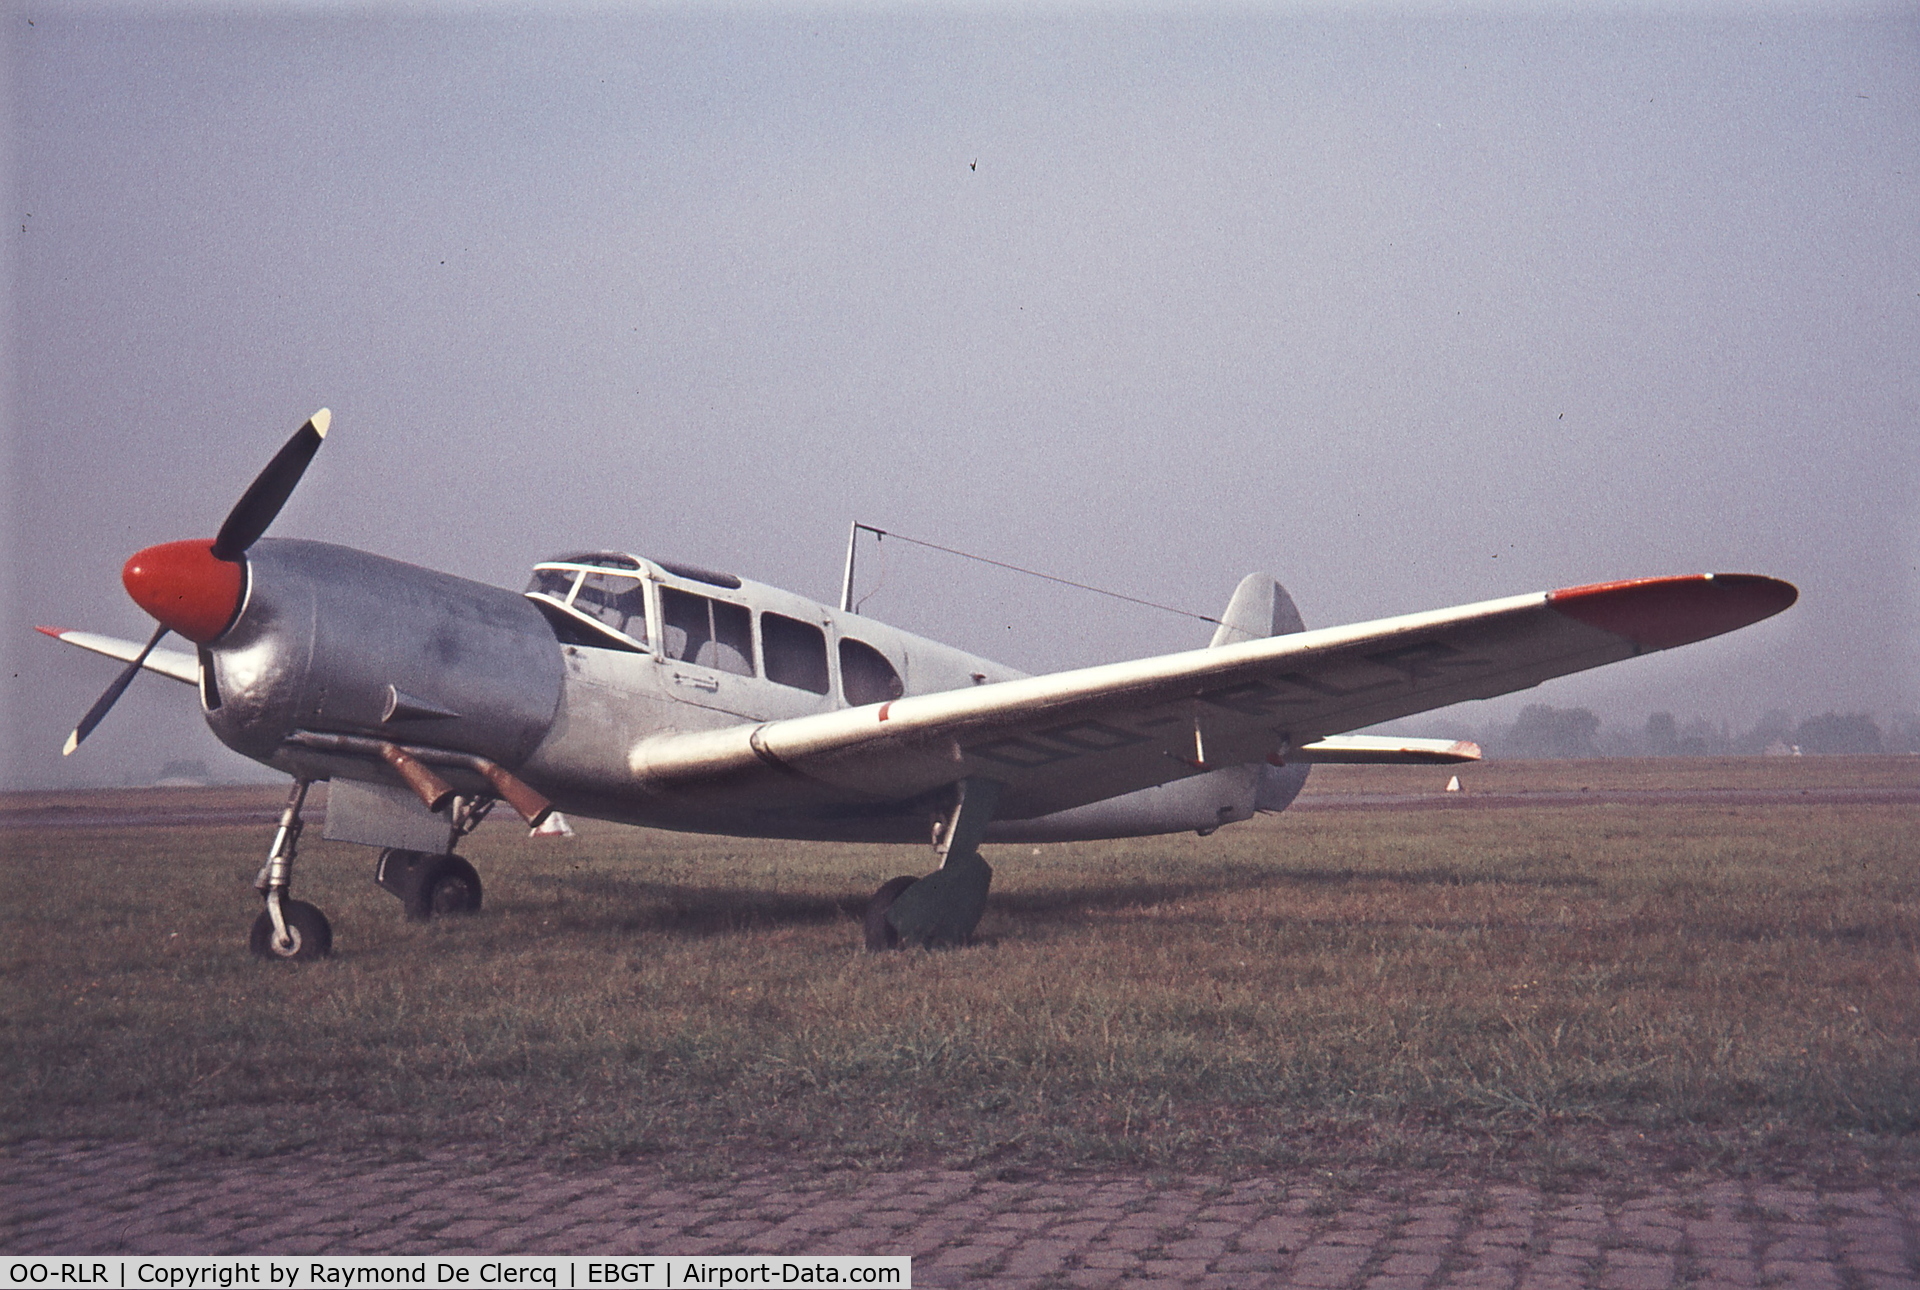 OO-RLR, 1947 Nord 1101 Noralpha C/N 103, Gent  1970